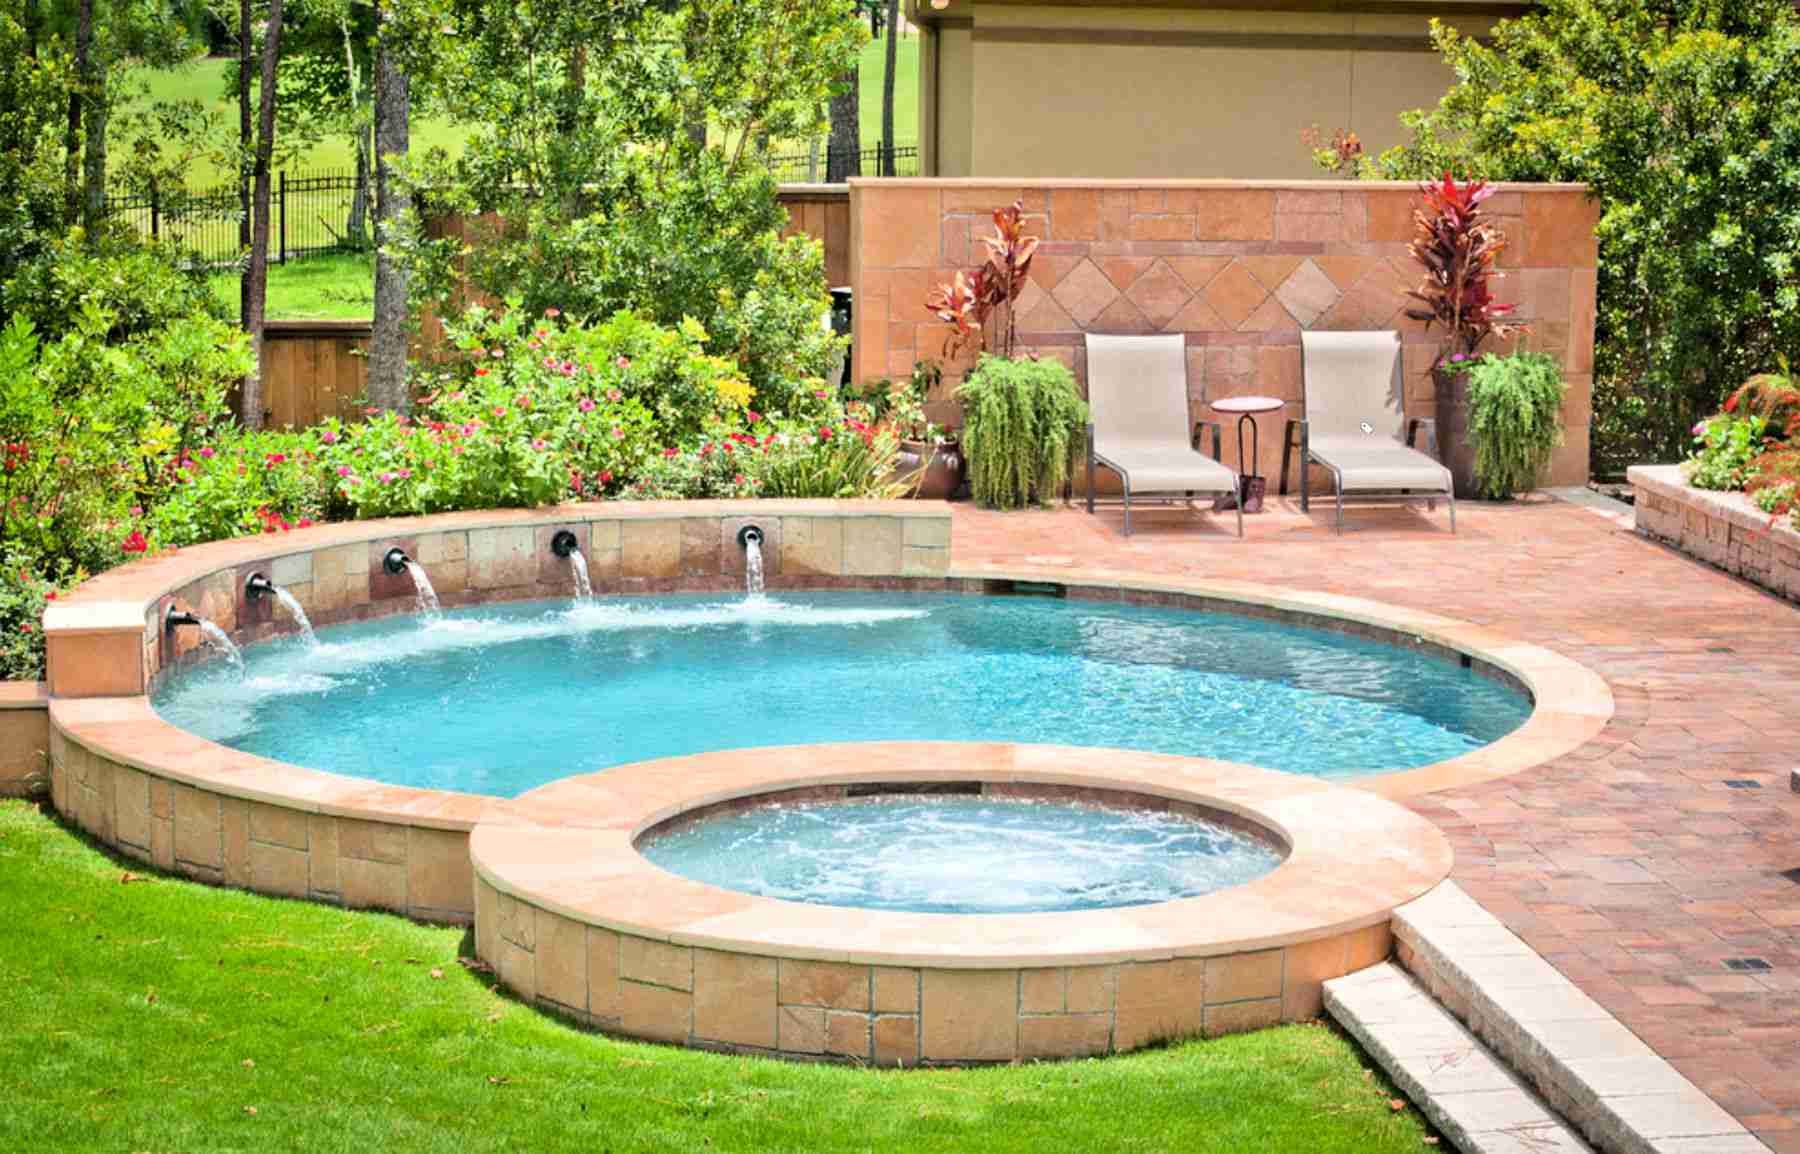 15 Most Beautiful Tiny Pool Designs In The Backyard